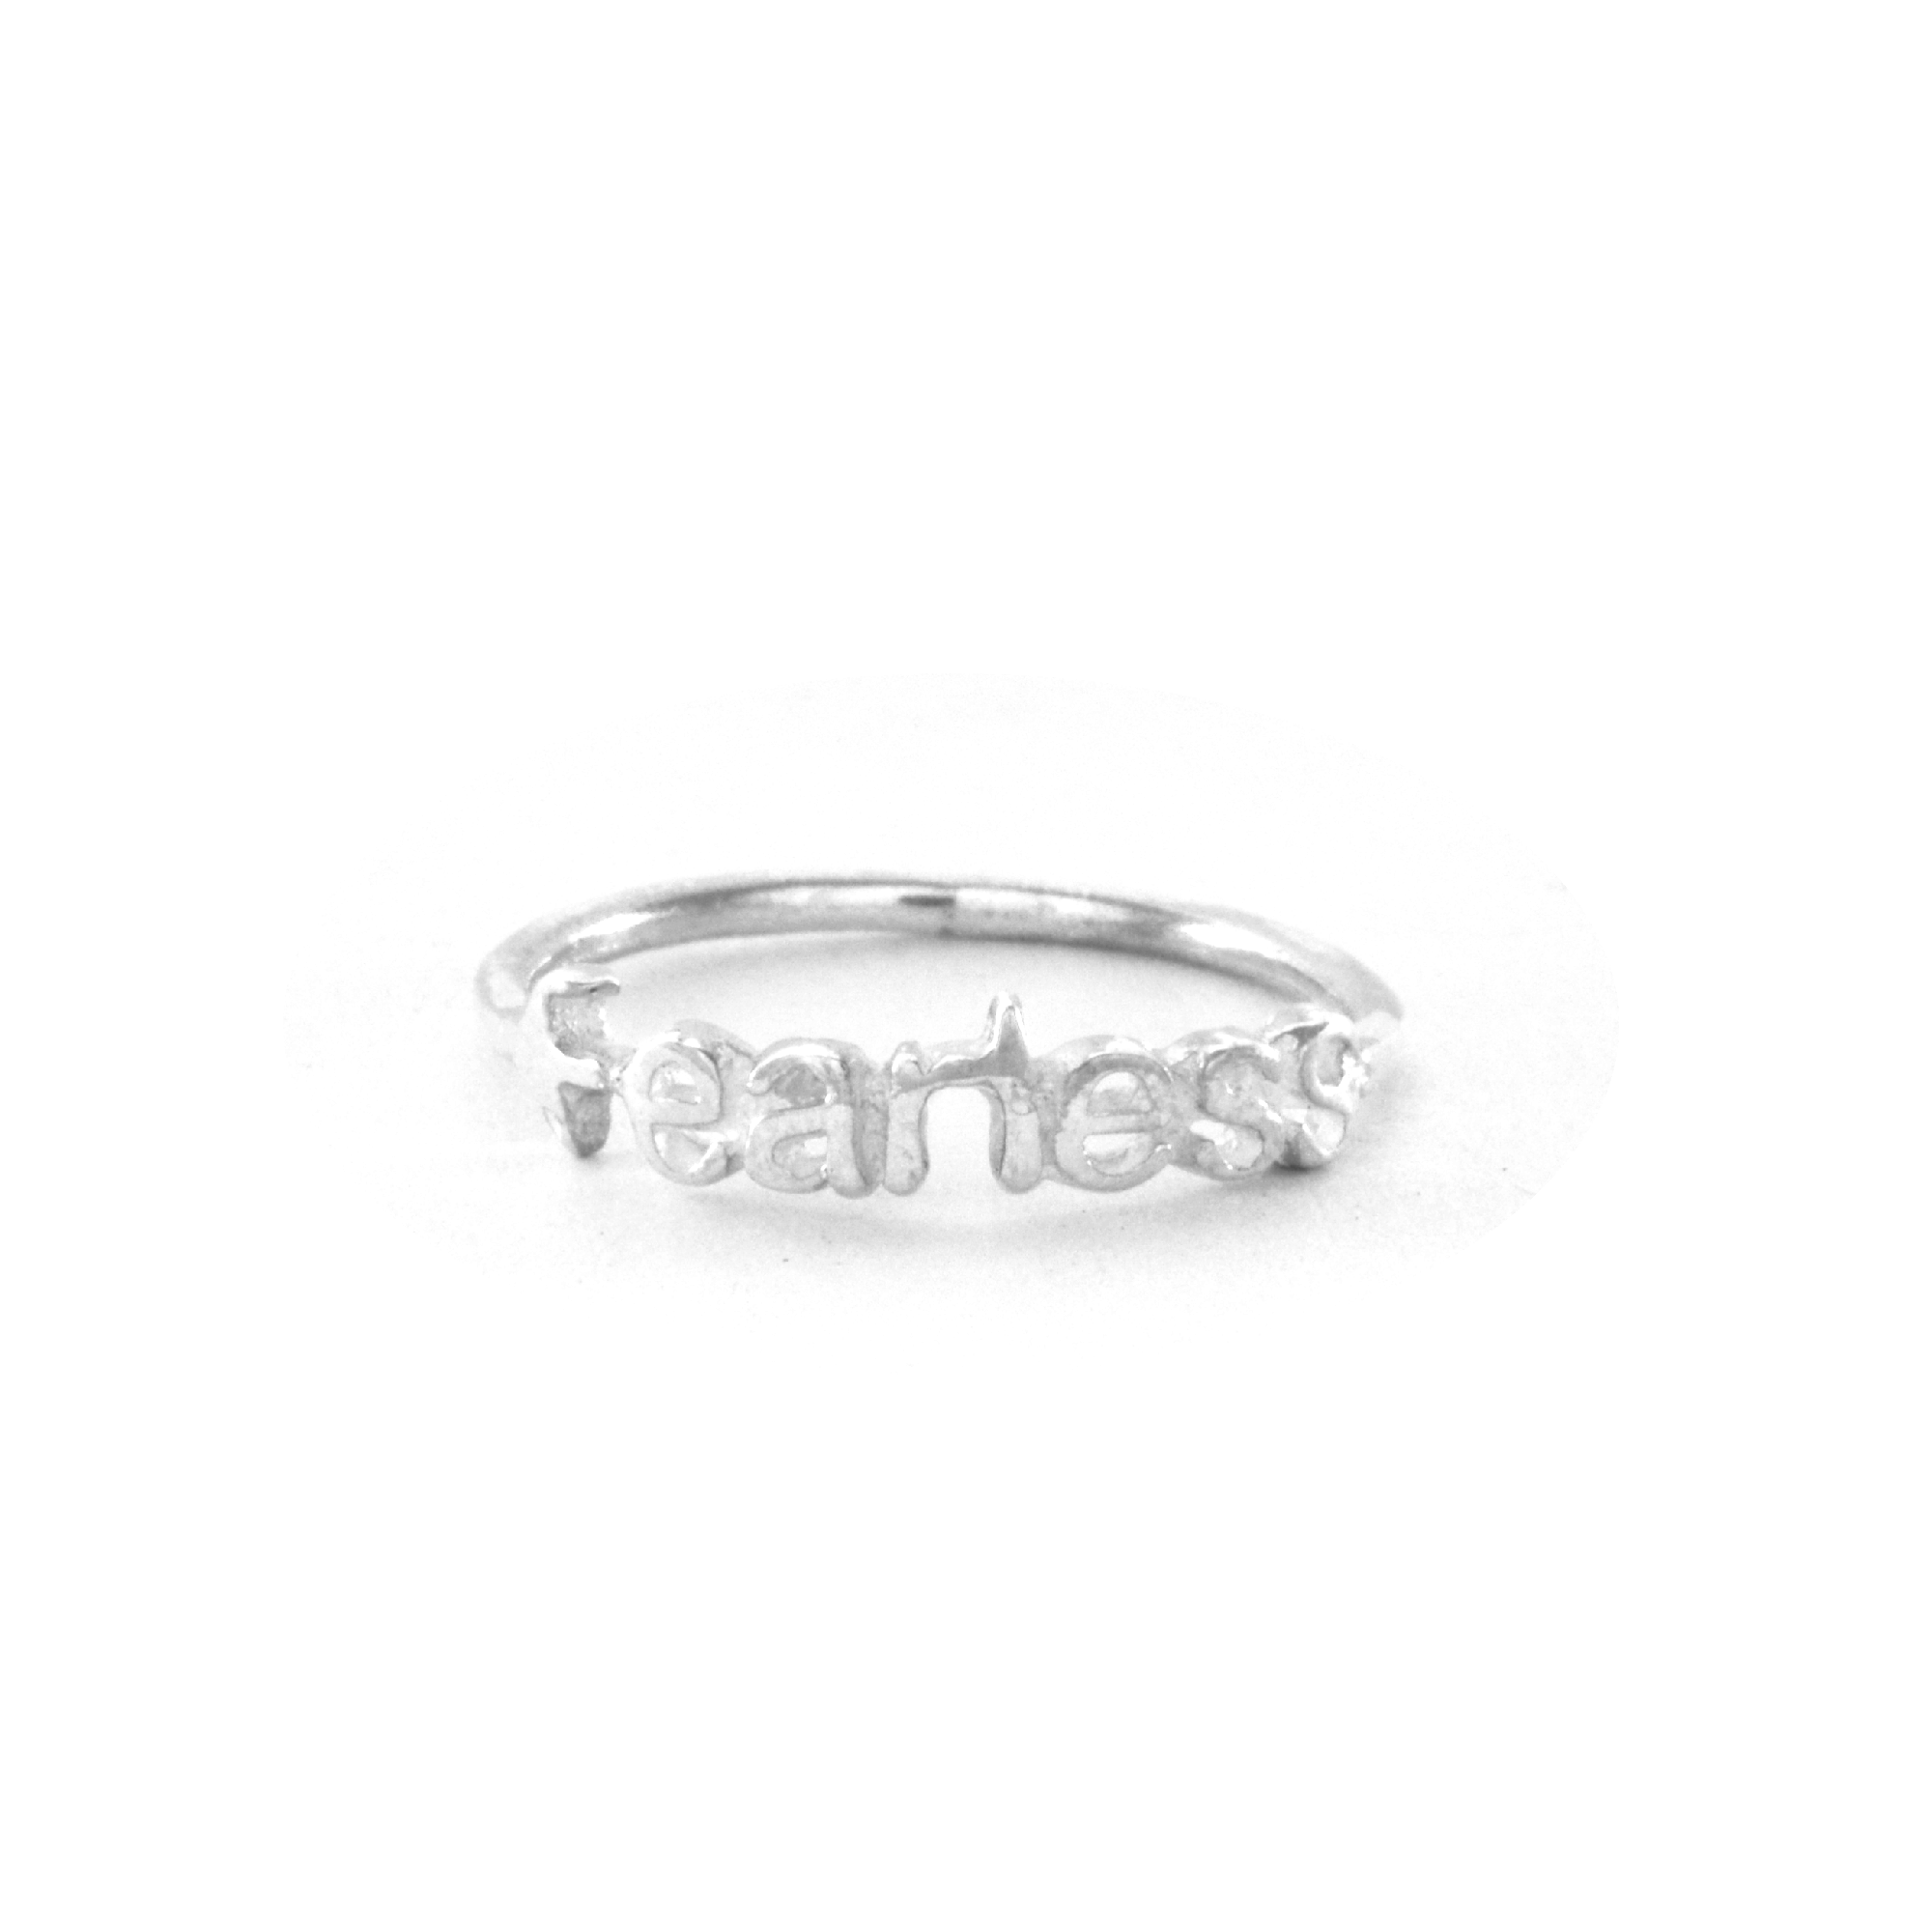 Fearless Ring Sterling Silver